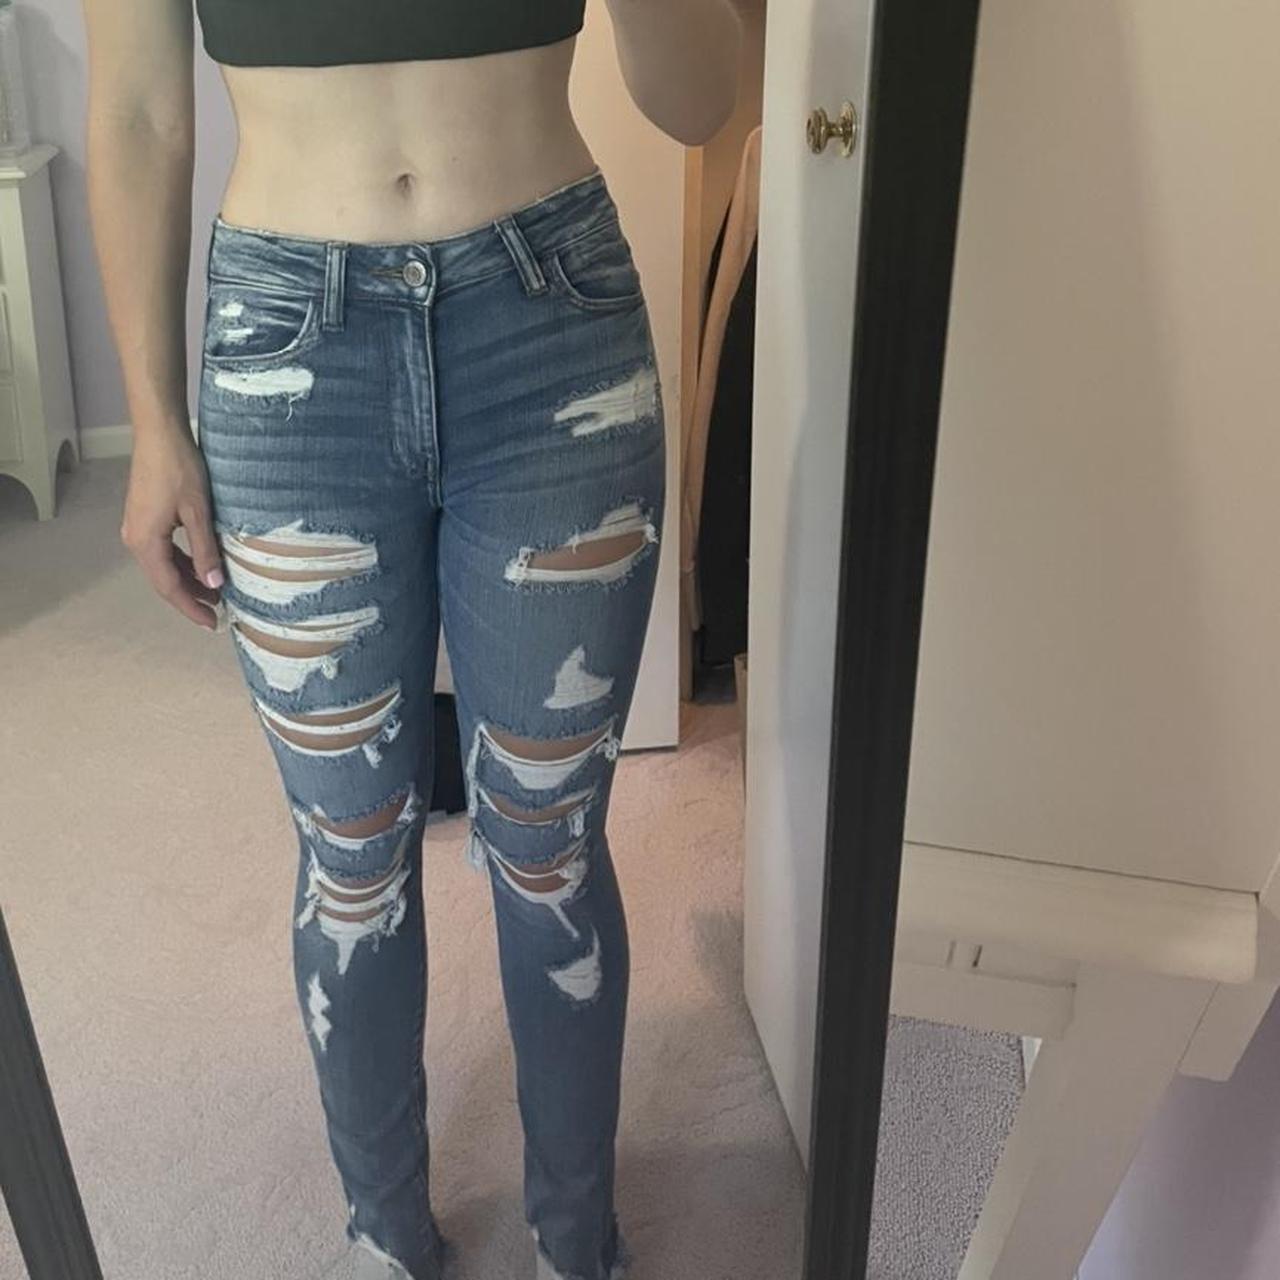 AMERICAN EAGLE brand dark ripped jeans 💙 •mid rise, - Depop